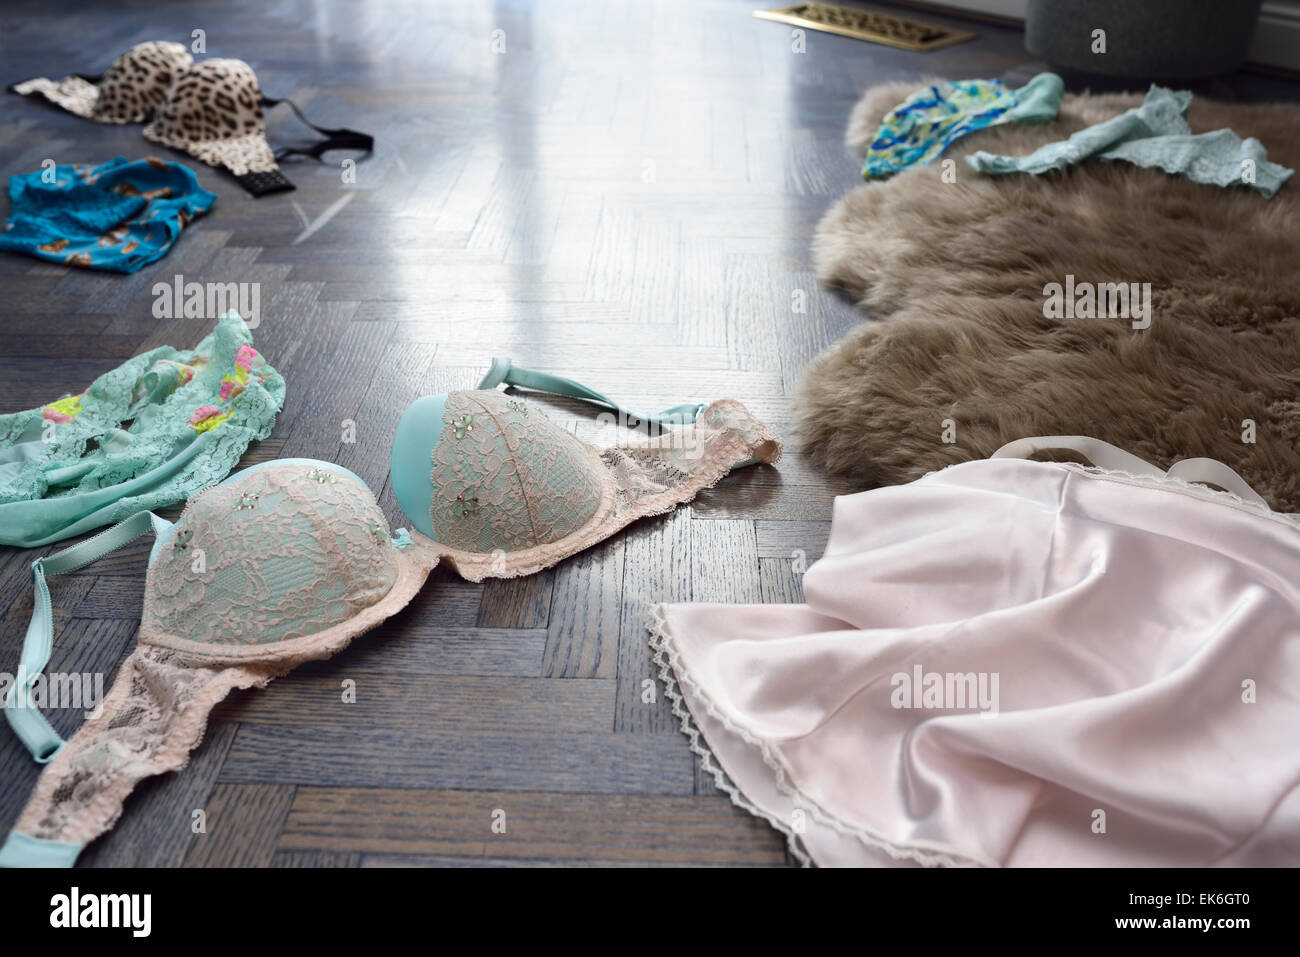 Bras and womans undergarment lingerie panties and slip strewn on a